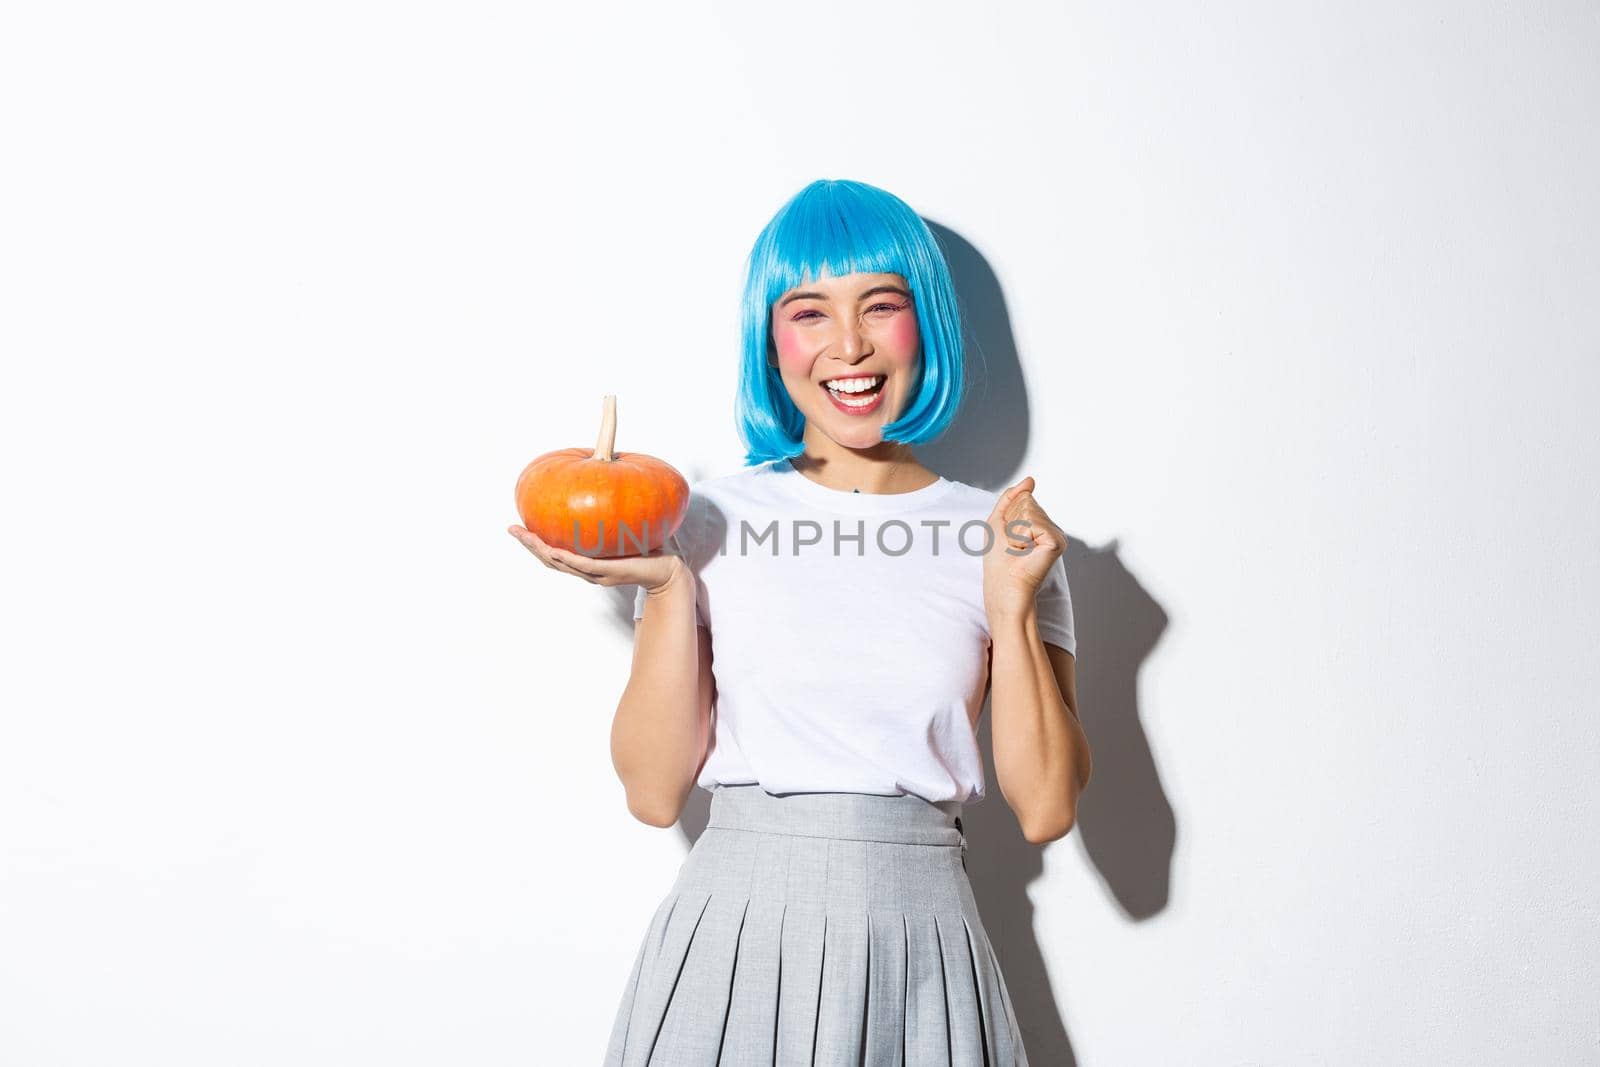 Cheerful cute asian girl celebrating halloween, wearing party costume and wig, holding small pumpkin, standing over white background.